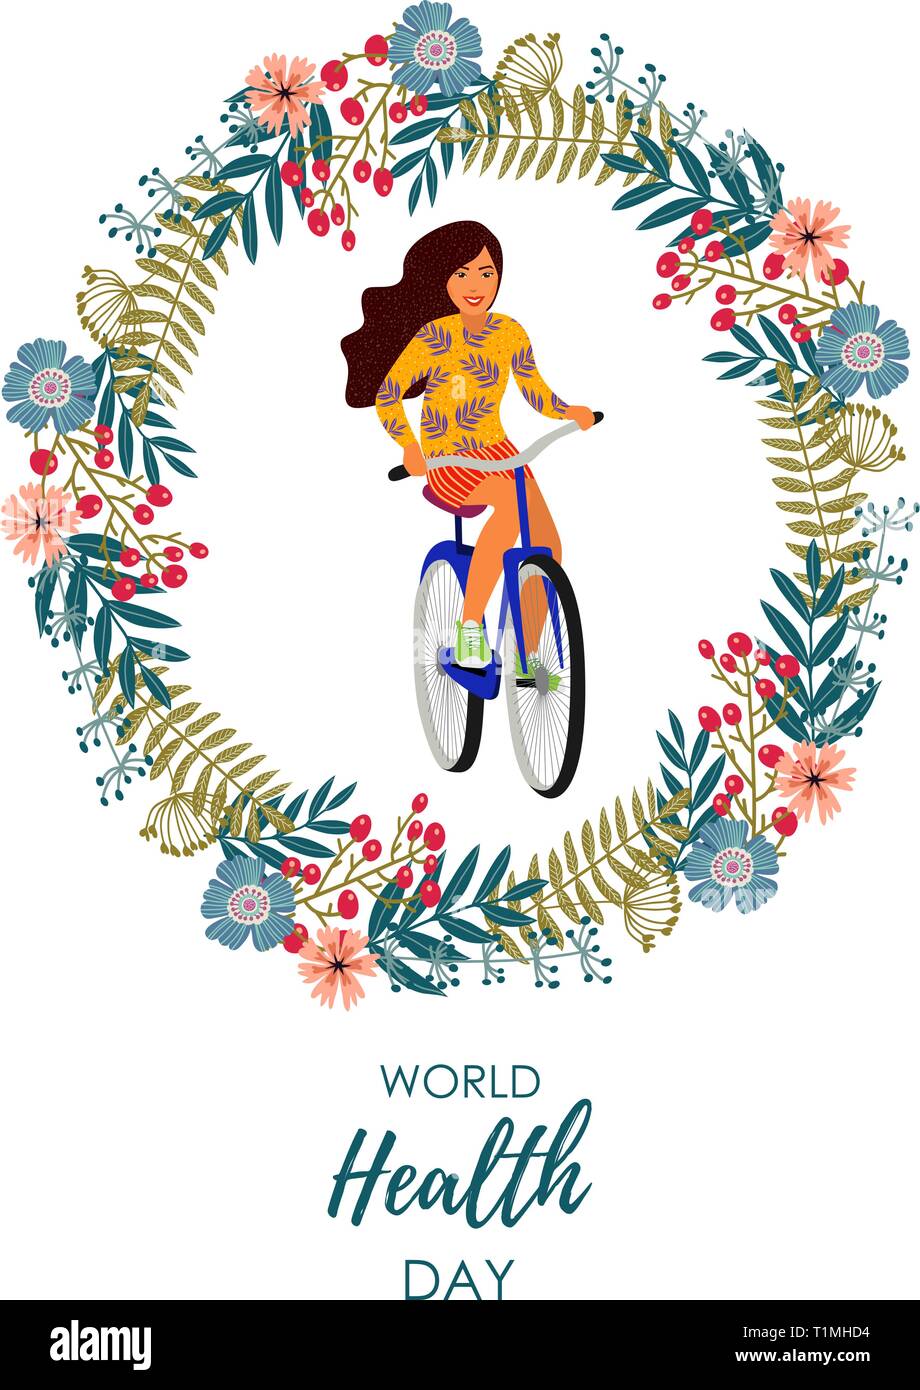 Healthy lifestyle. Vector illustration with girl on a bicycle inside a floral wreath on a white background. Stock Vector